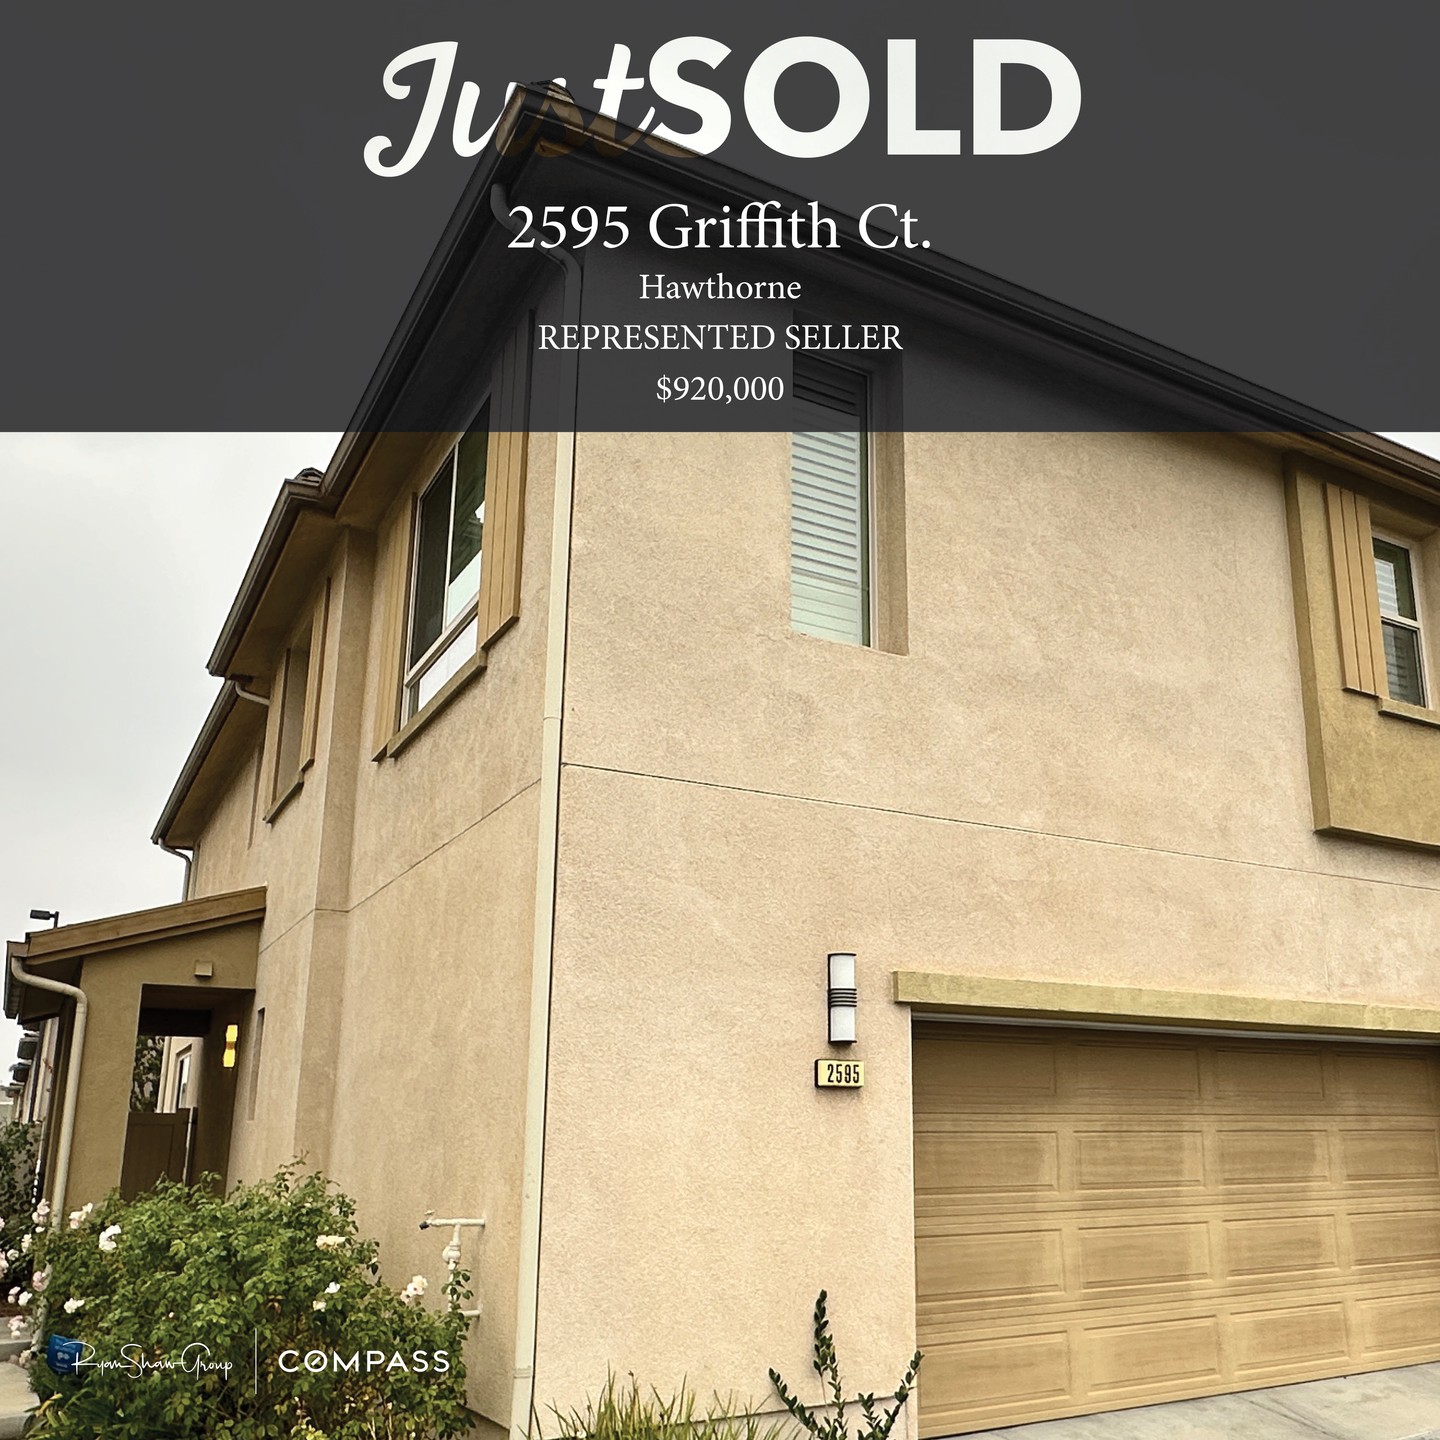 JUST SOLD! | Many years ago now we were excited...